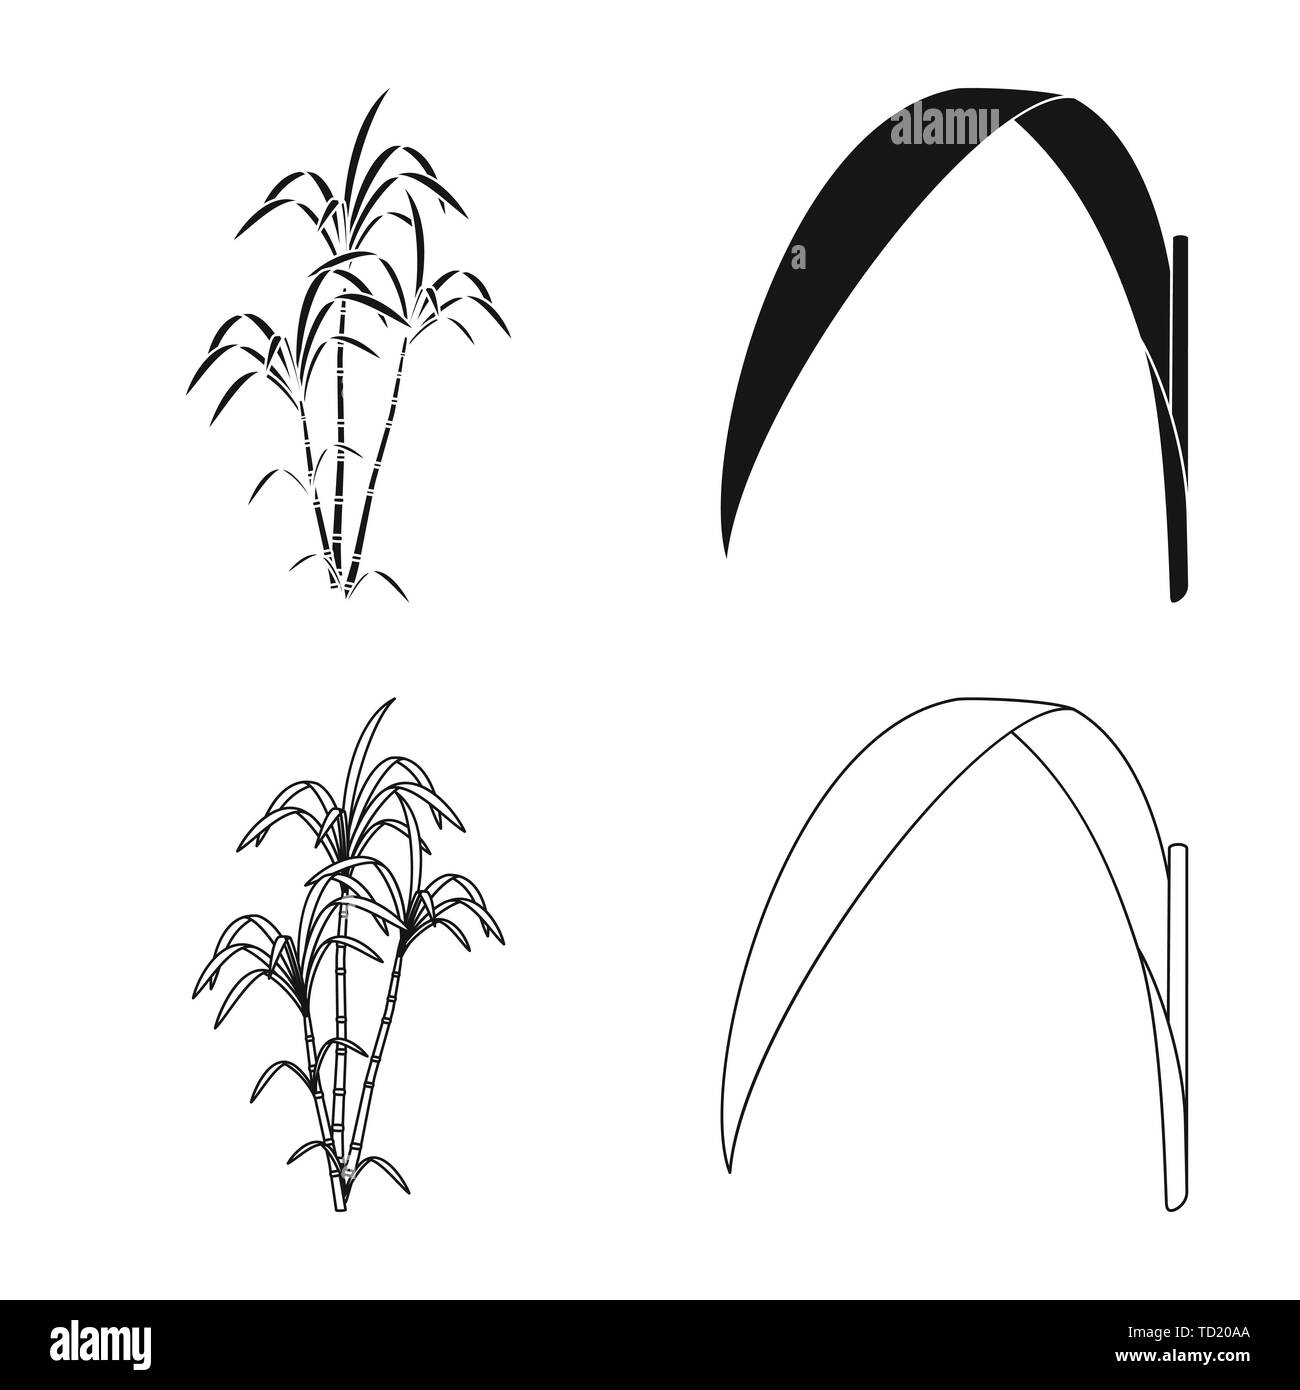 bush,leaf,palm,green,growth,raw,branch,material,juice,stock,natural,pillar,eco,africa,india,photosynthesis,farm,agriculture,sucrose,technology,sugarcane,cane,sugar,field,plant,plantation,set,vector,icon,illustration,isolated,collection,design,element,graphic,sign, Vector Vectors , Stock Vector